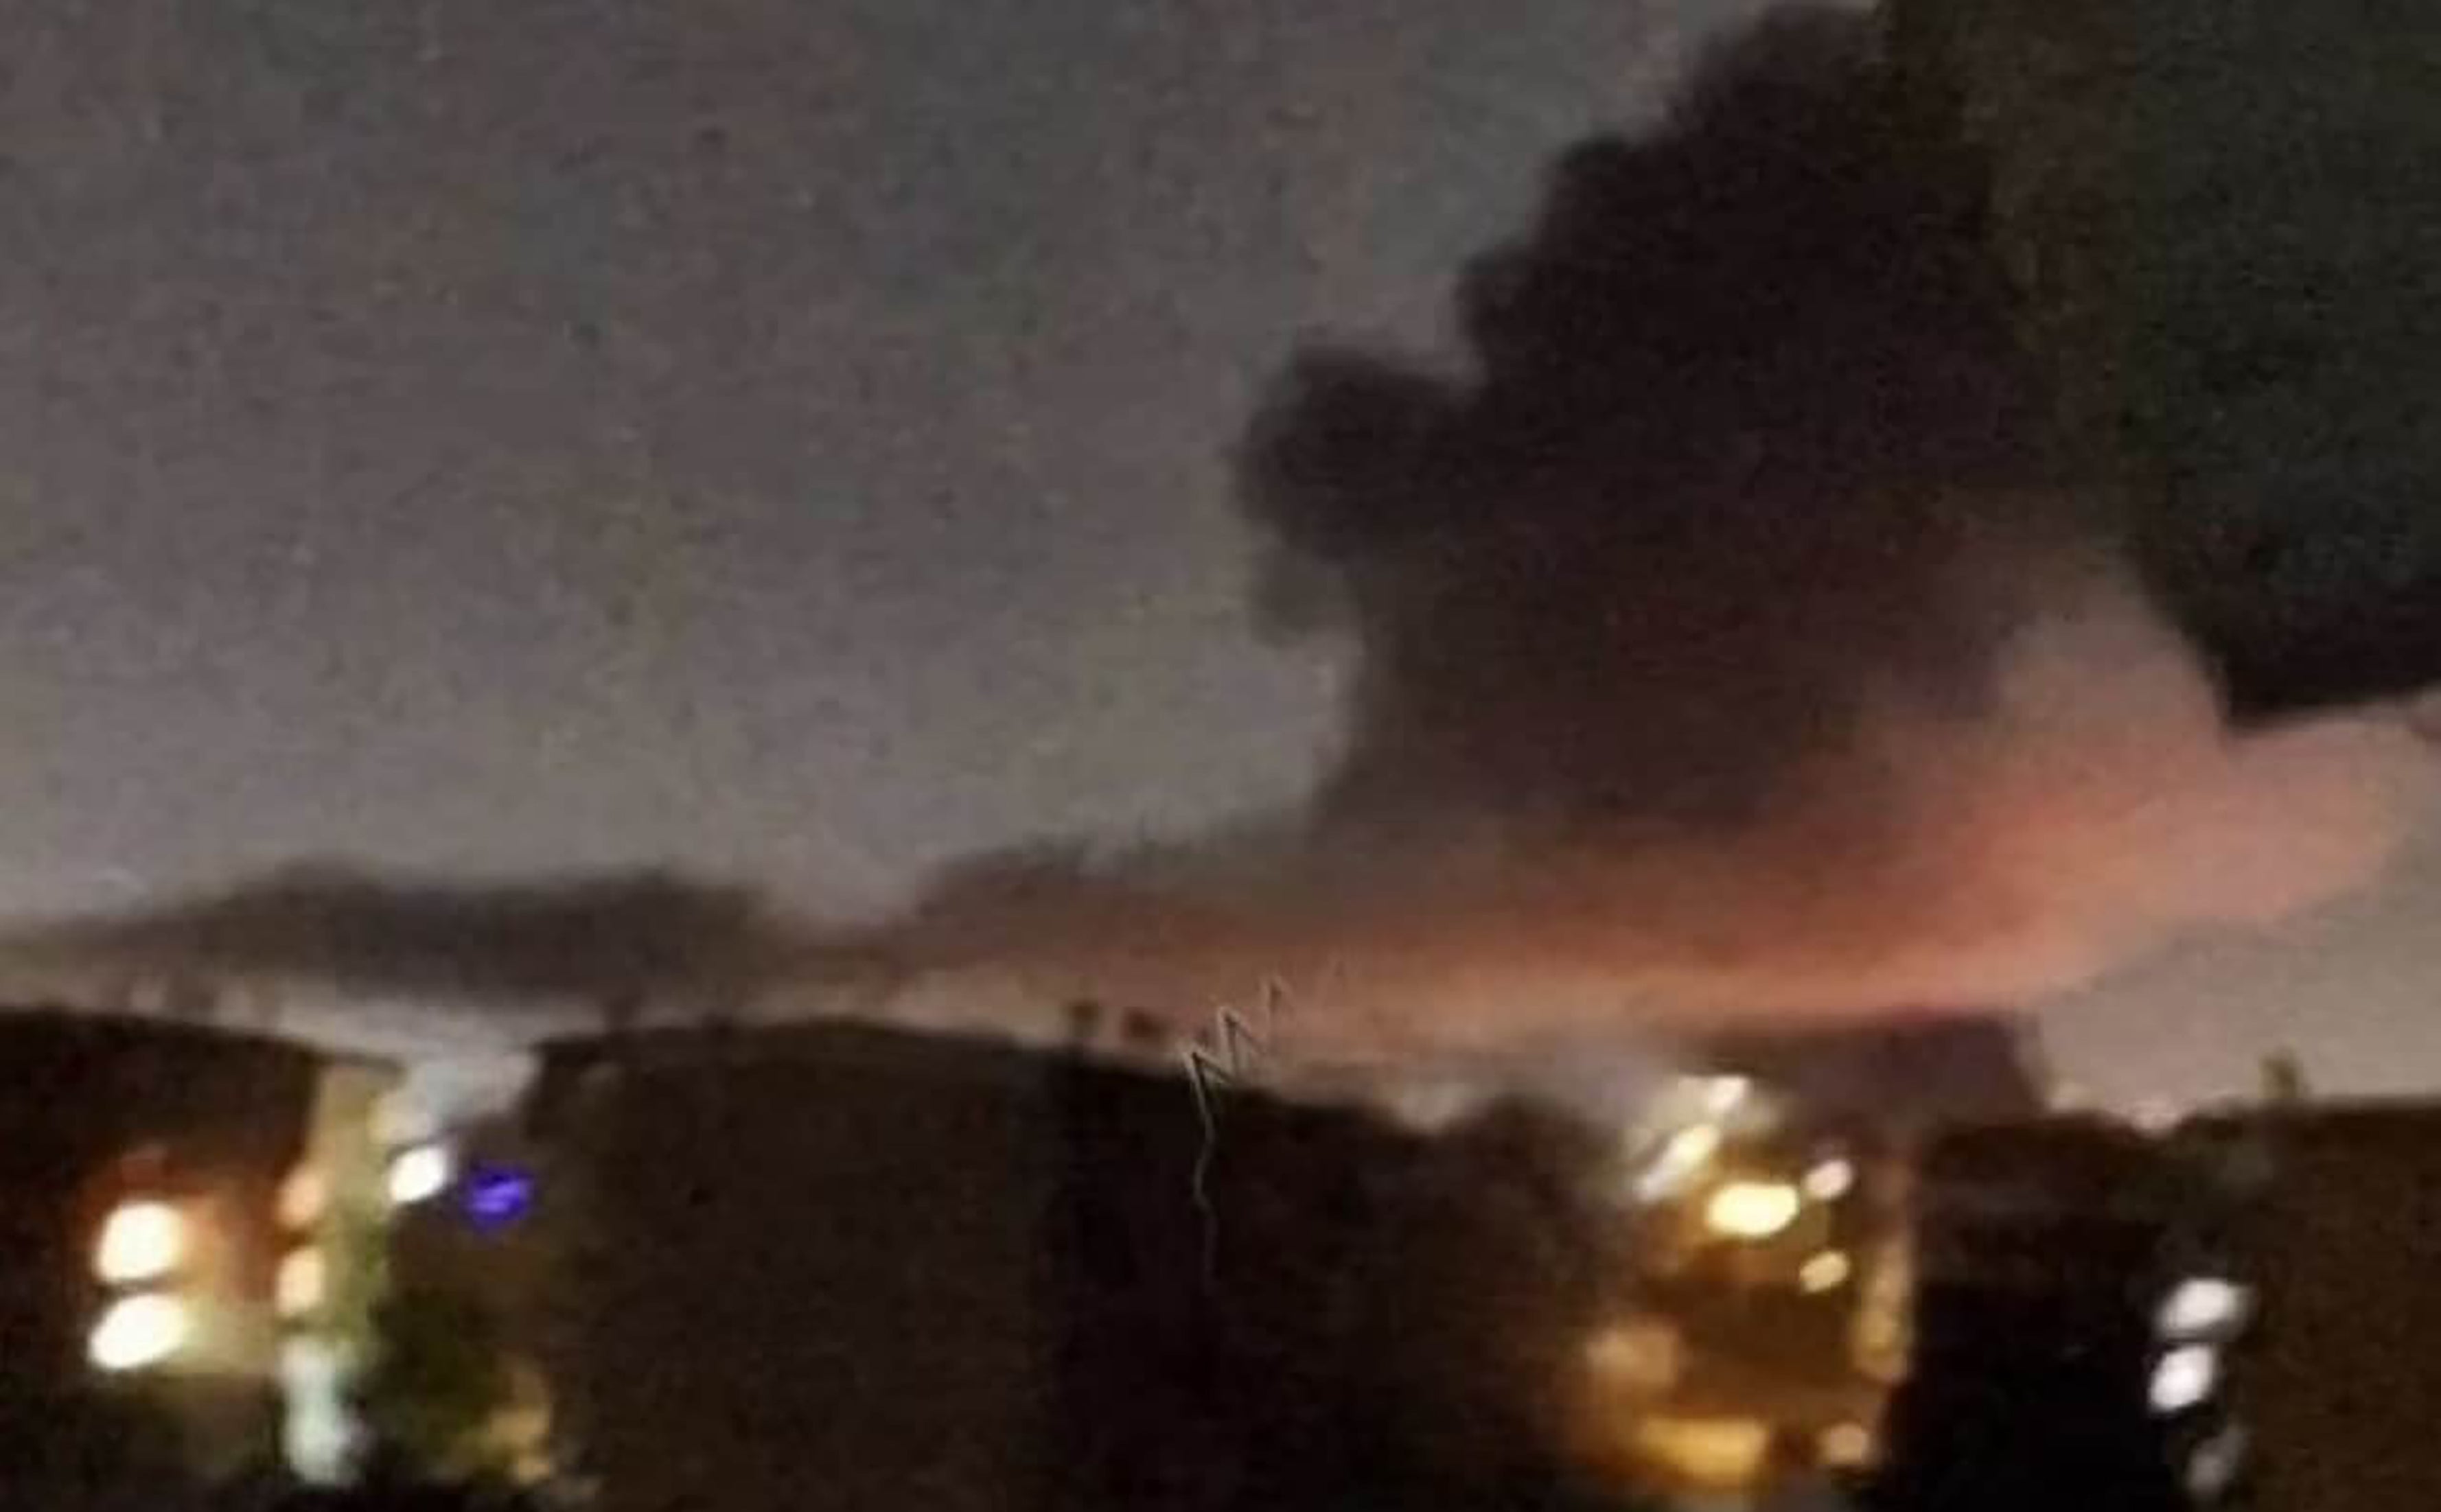 A still from footage released by the Islamic Revolutionary Guard Corps of explosions near the city of Isfahan. The Independent is unable to independently verify the content, date, and conditions under which this was filmed.